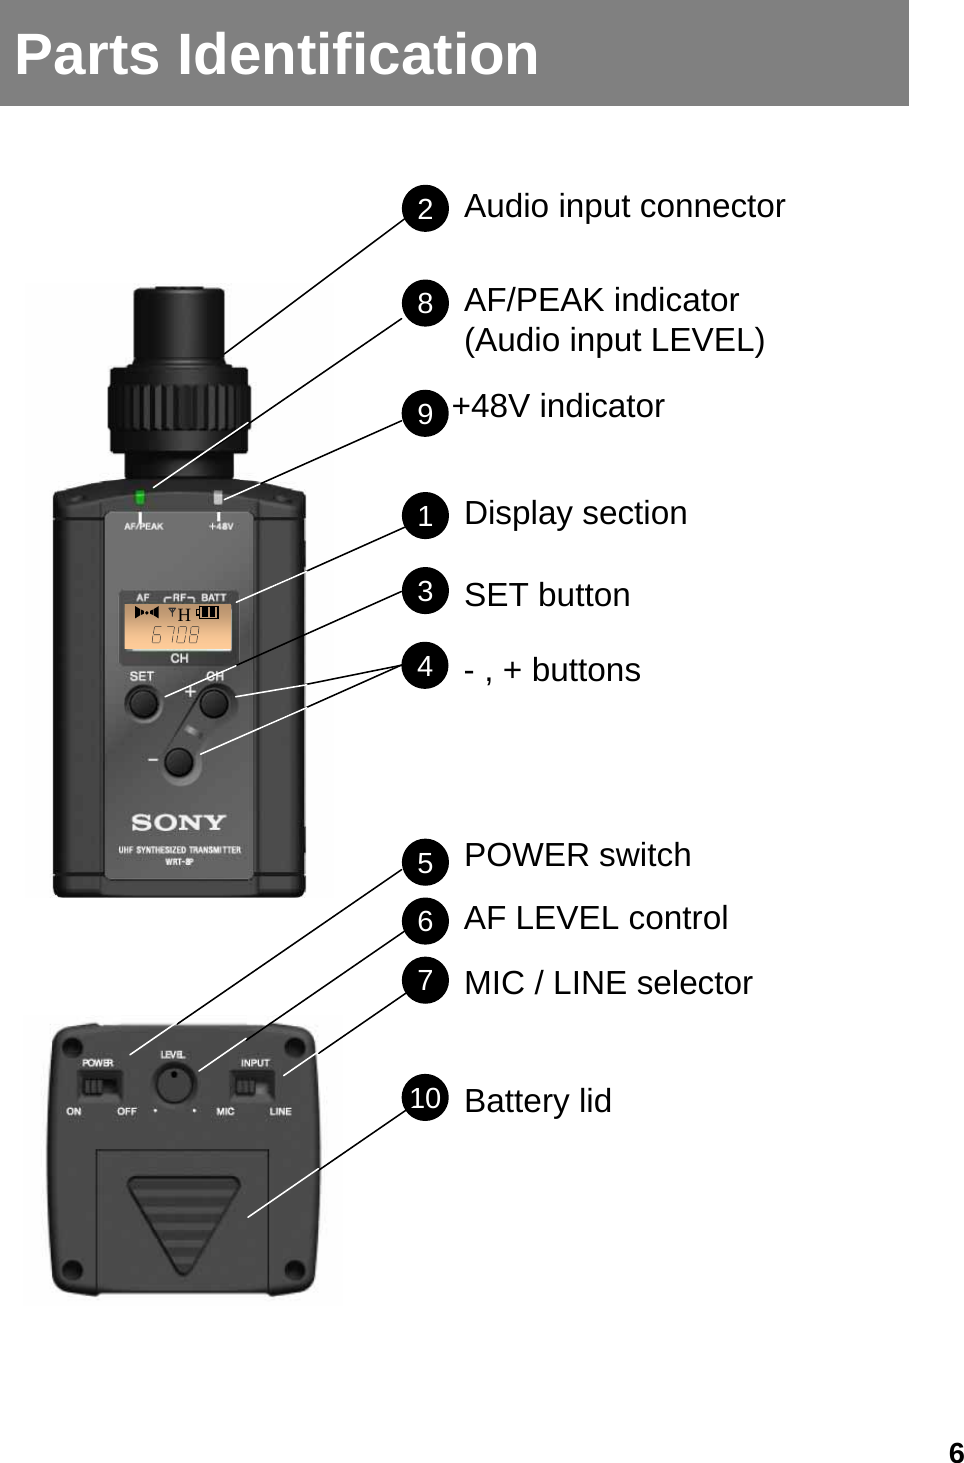 Parts IdentificationAudio input connector28913567AF/PEAK indicator(Audio input LEVEL)HDisplay sectionSET button6MIC / LINE selectorPOWER switch+48V indicator104- , + buttonsAF LEVEL controlBattery lid